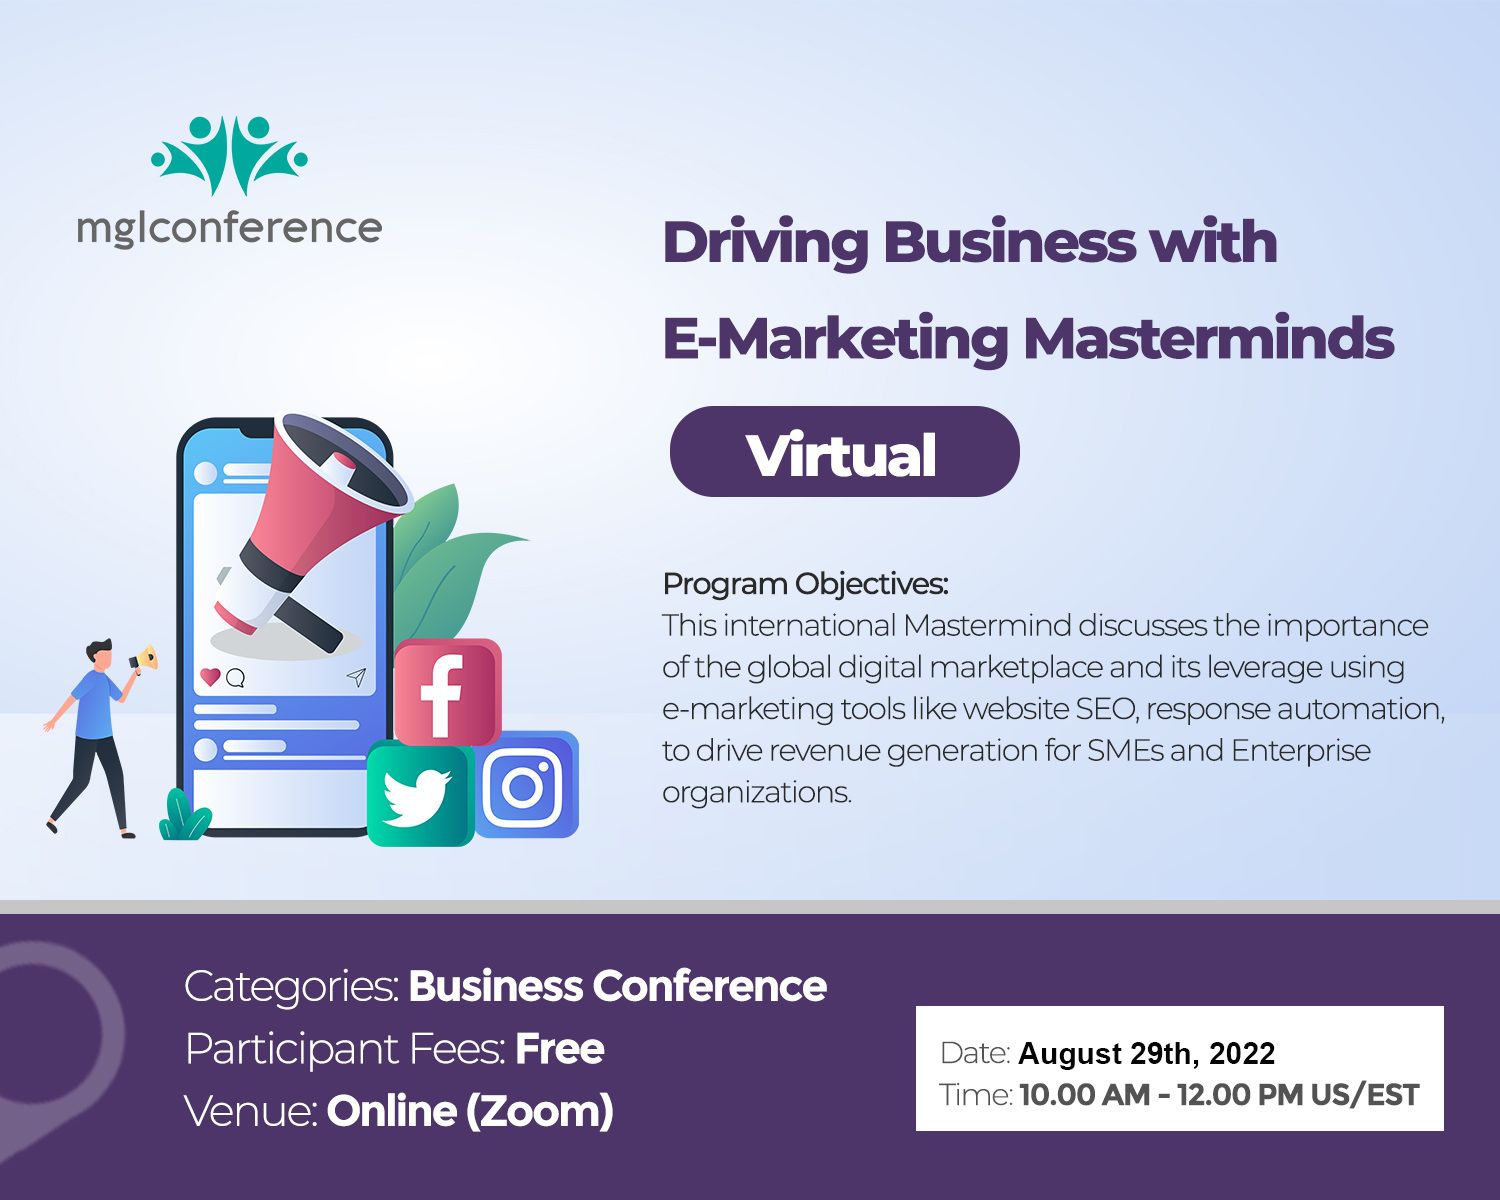 Driving Business with E-Marketing Masterminds (Virtual)